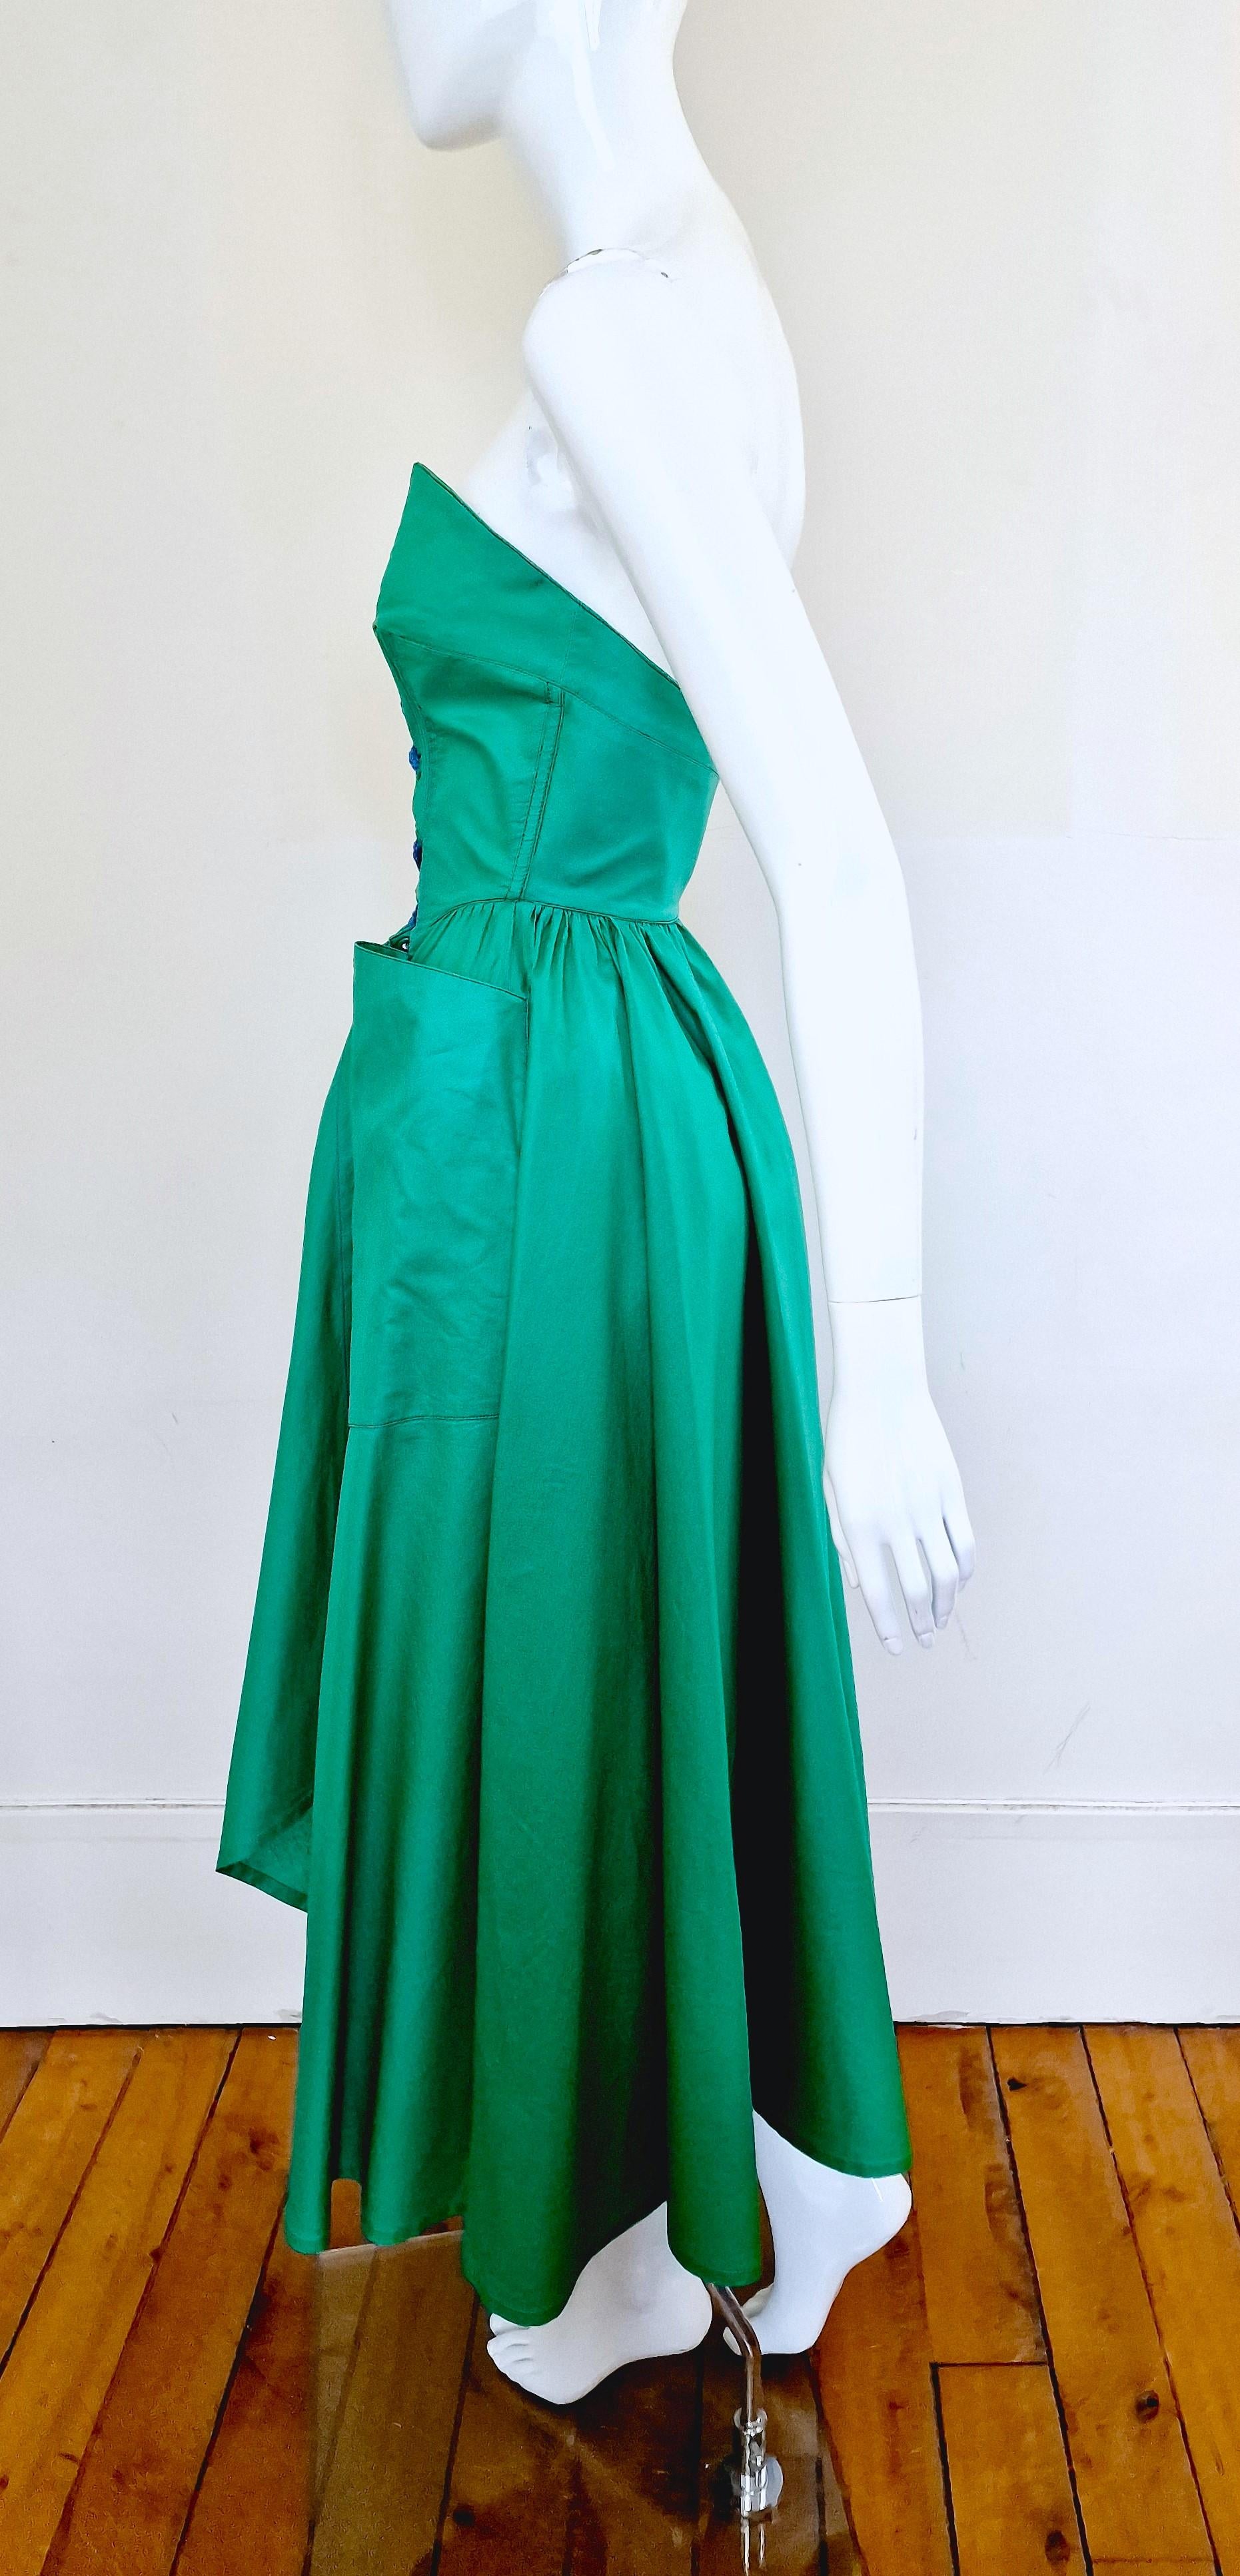 Thierry Mugler Corset Lace Up Green Vintage Couture Gown Prom Bustier Dress en vente 3